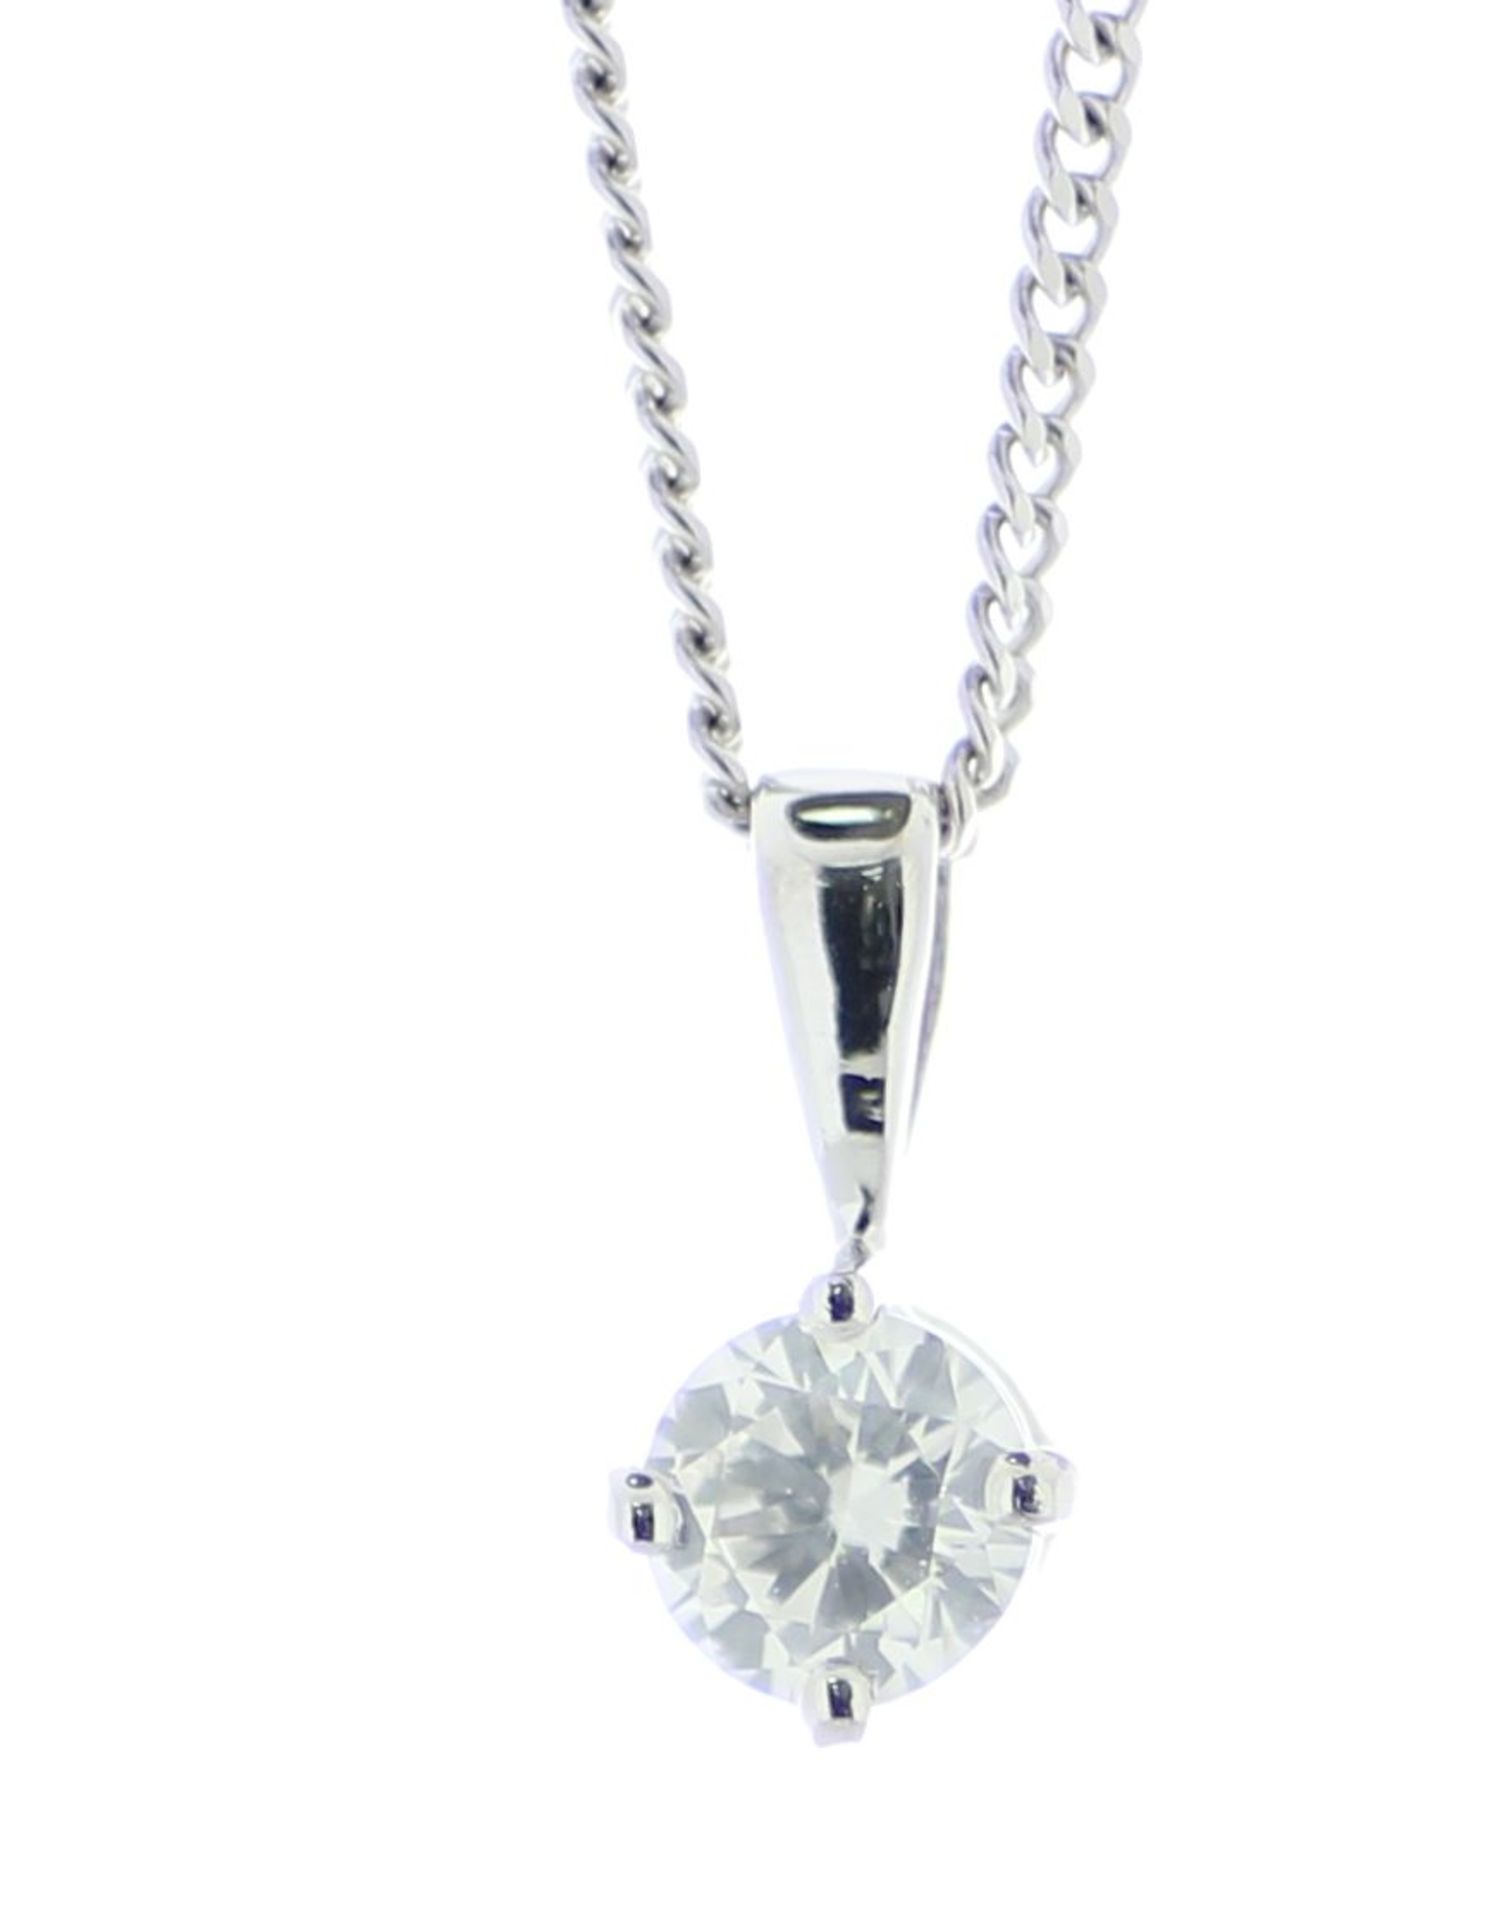 18ct White Gold Single Stone Prong Set Diamond Pendant And Chain 0.51 Carats - Valued By IDI £3,